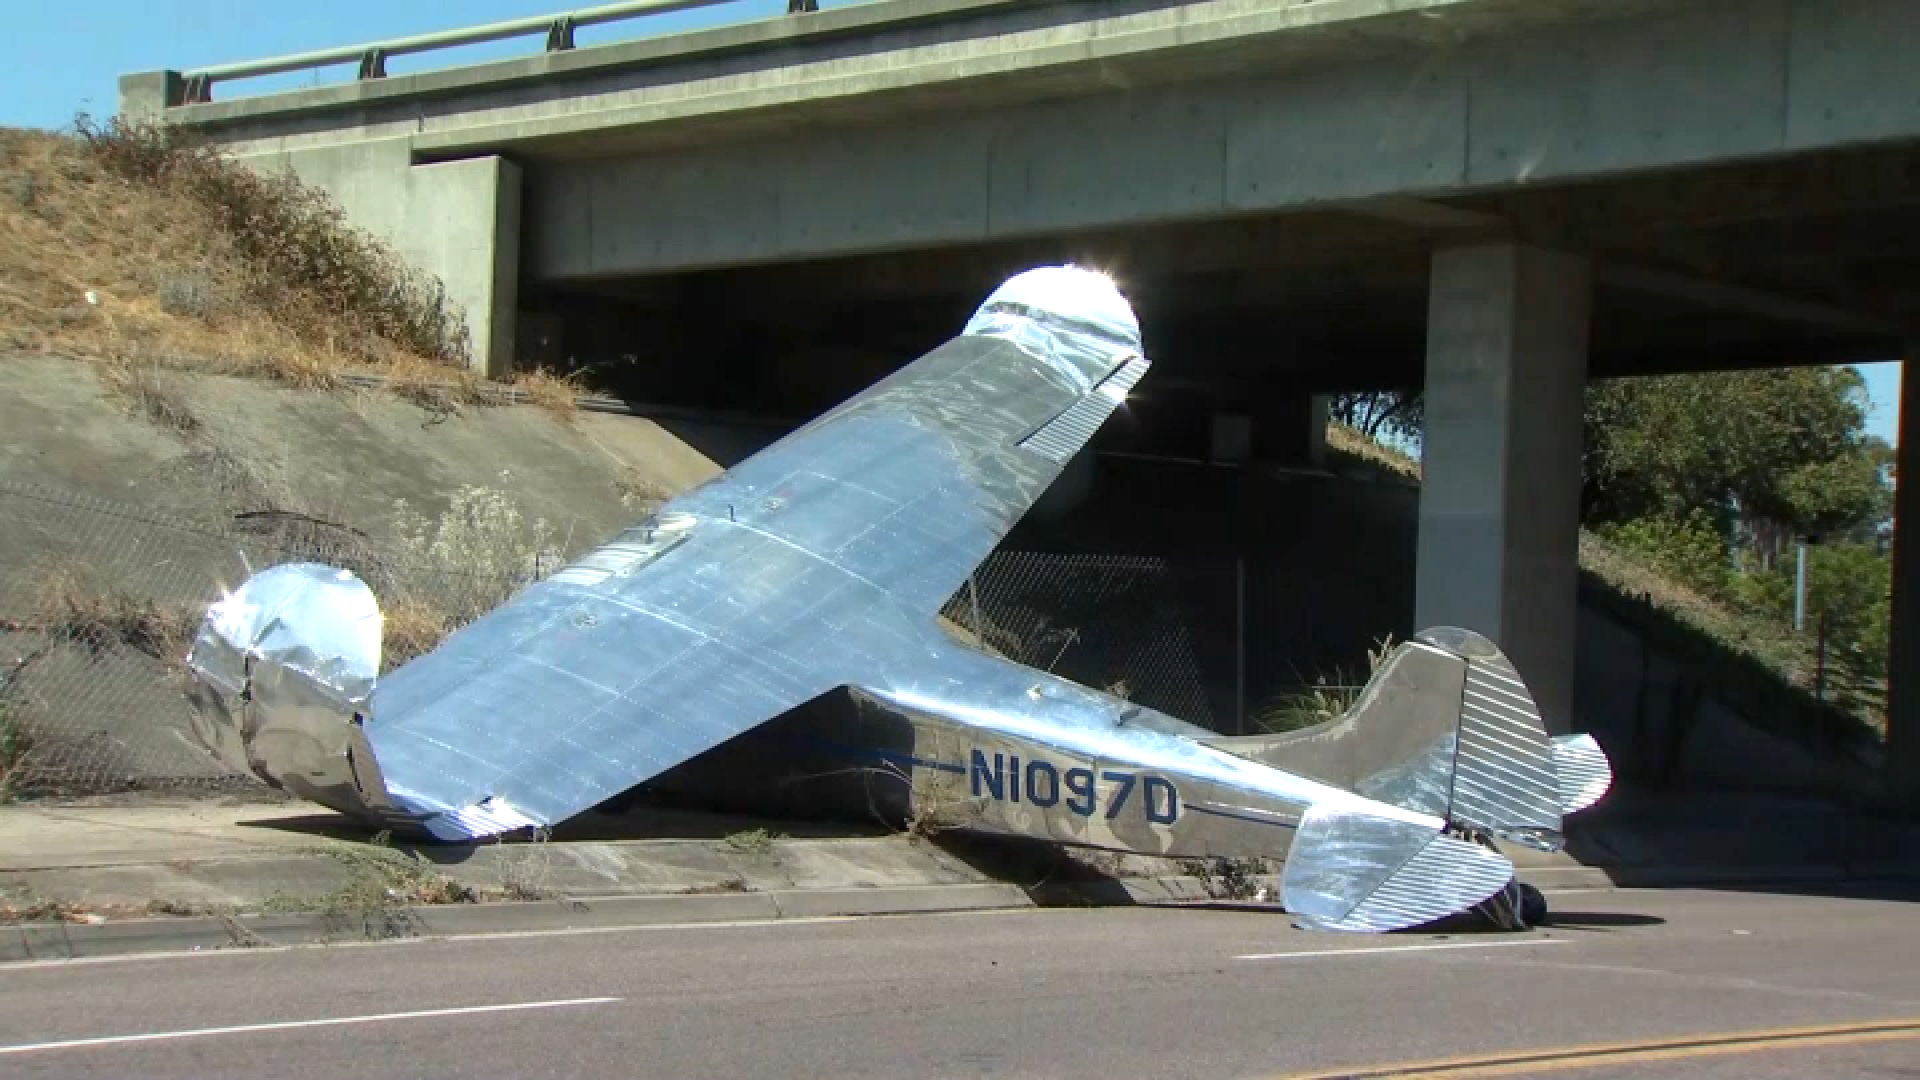 An image of the small plane that crashed near Interstate 8 in El Cajon on Thursday, Aug. 18, 2022.